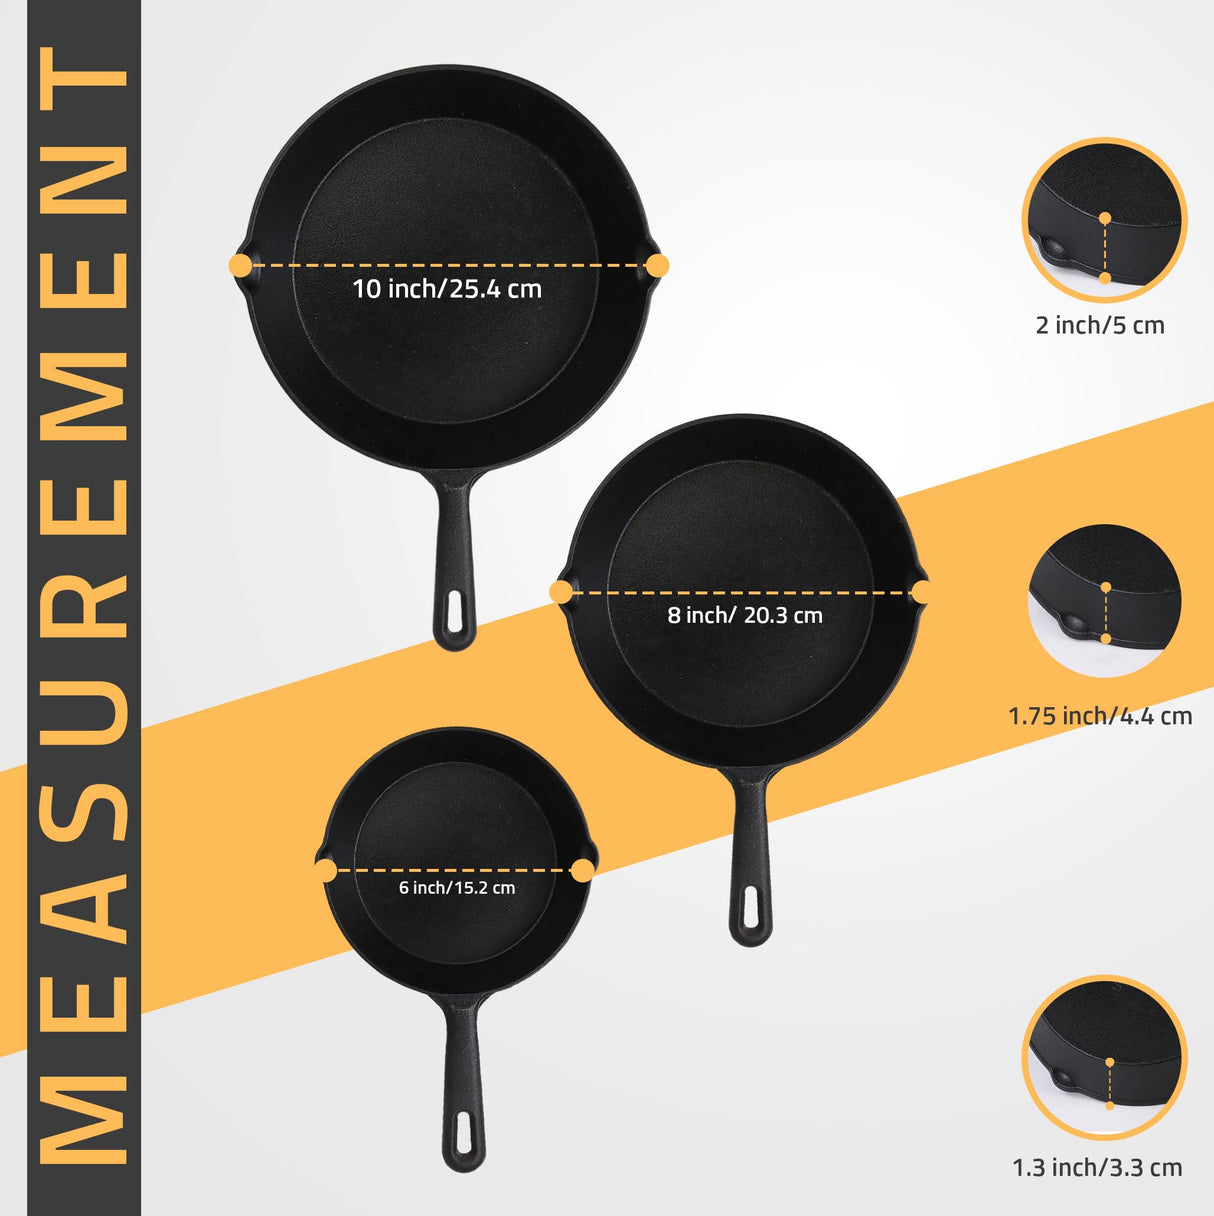 Utopia Kitchen Saute Fry Pan - Pre-Seasoned Cast Iron Skillet Set 3-Piece - Frying Pan - 6 Inch, 8 Inch and 10 Inch Cast Iron Set (Black)